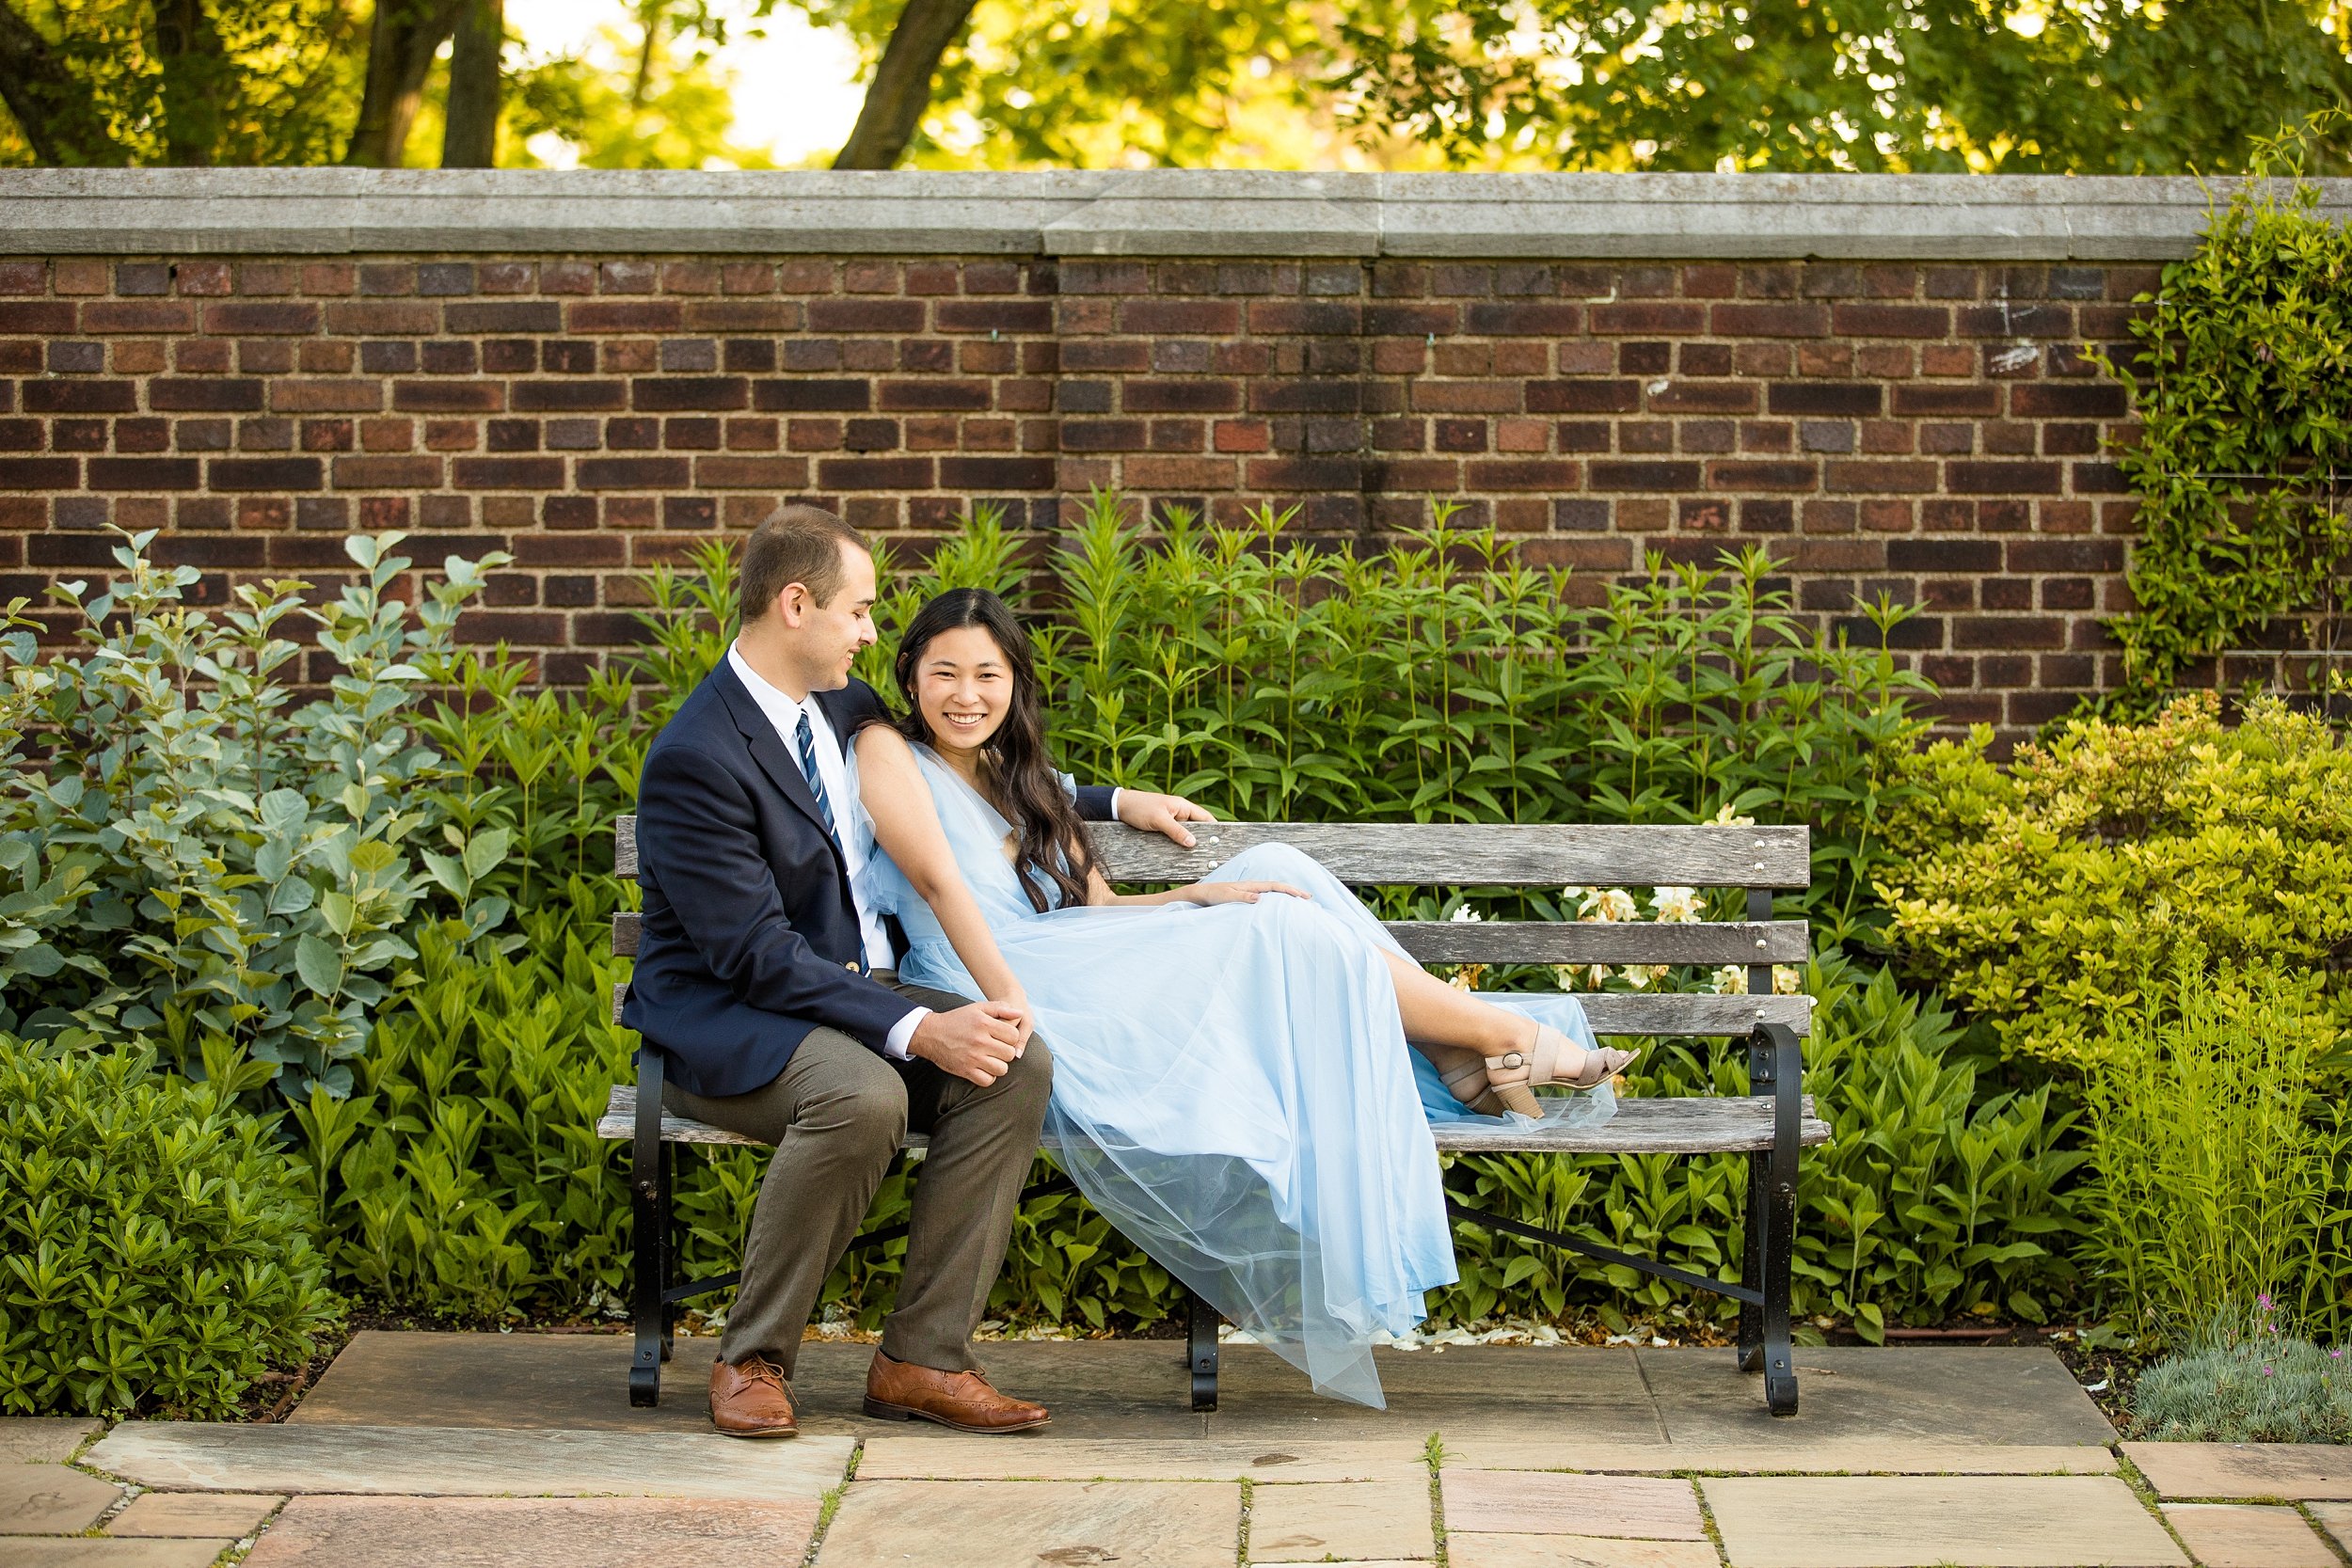 pittsburgh engagement photos, pittsburgh wedding photographer, locations in pittsburgh for engagement photos, mellon park engagement photos